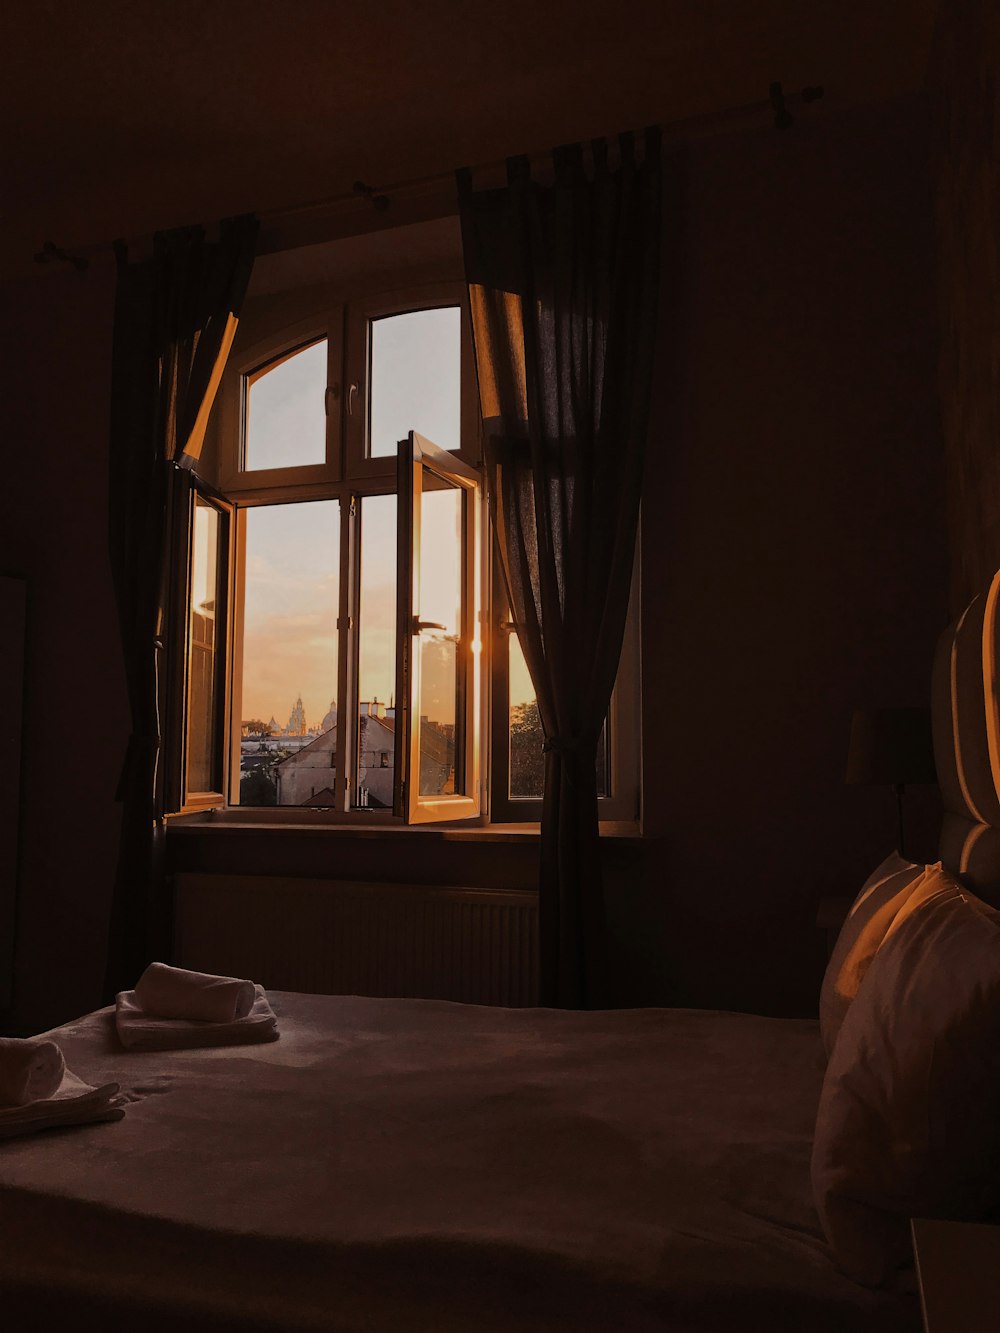 Morning Window Pictures | Download Free Images on Unsplash Open Window At Morning